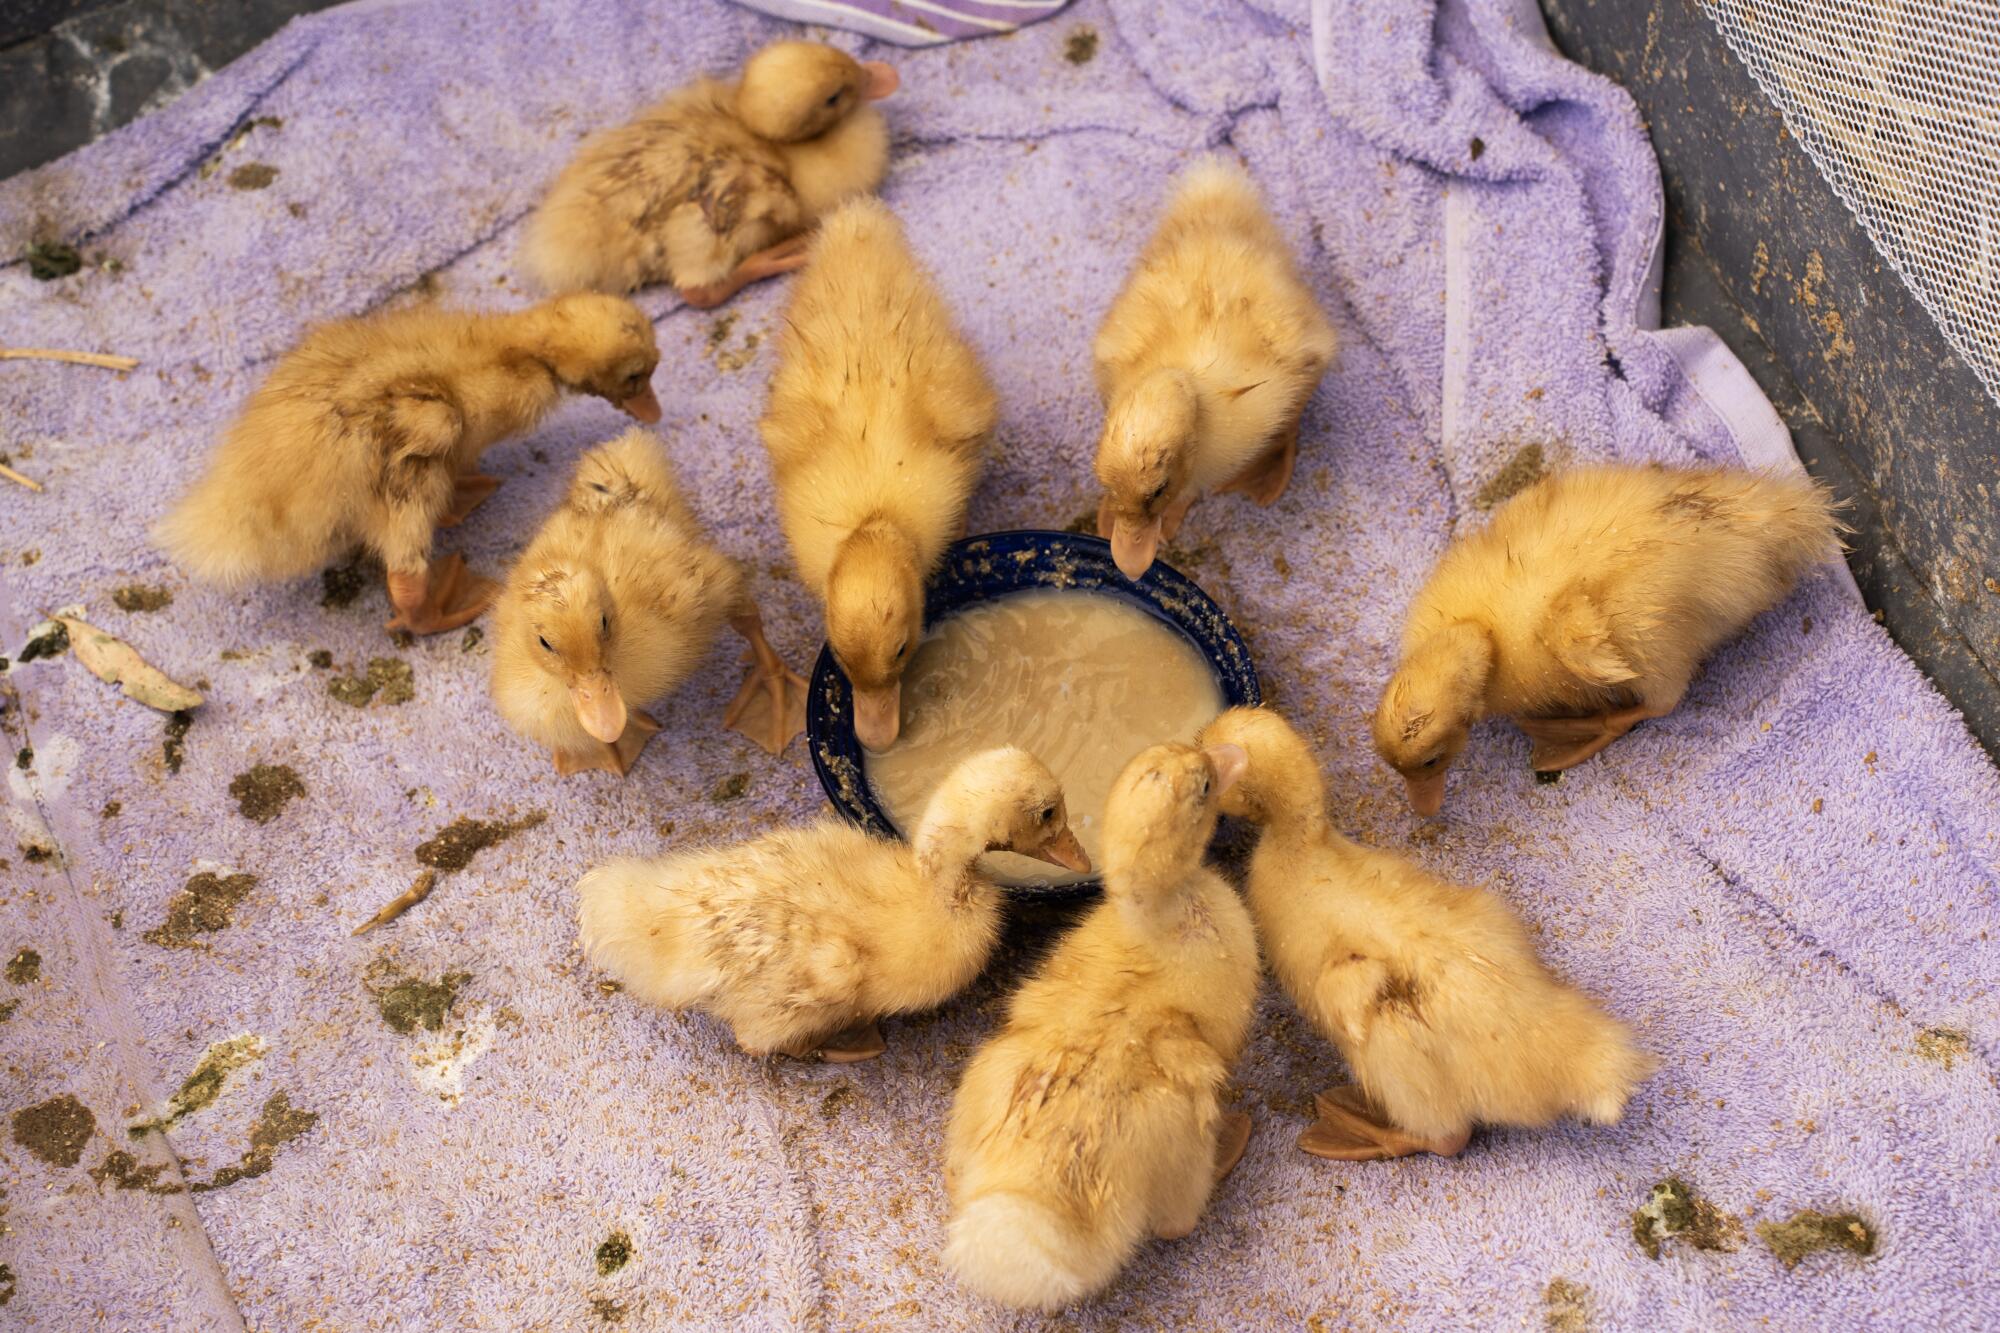 Yellow ducklings feed from a small bowl.